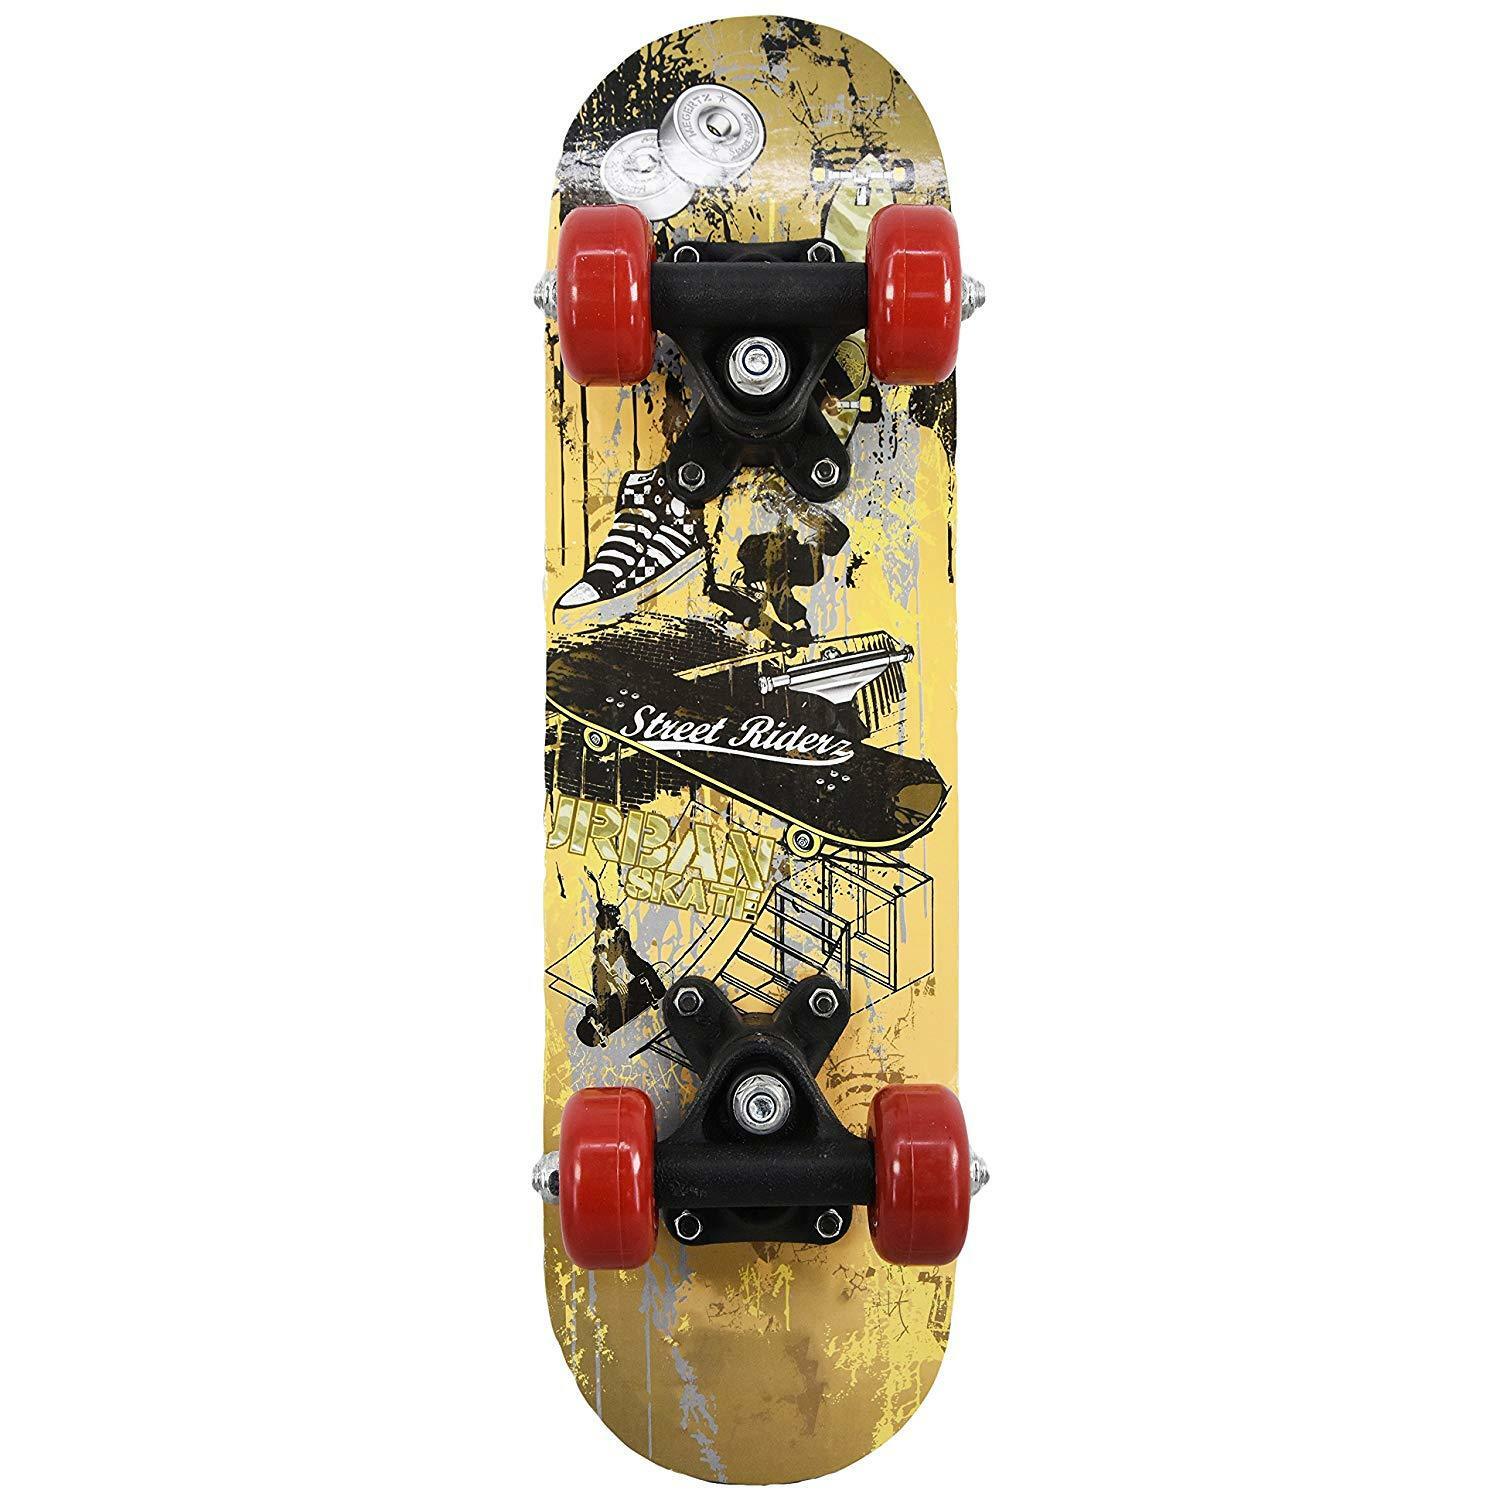 17'' Complete Skateboard - Beginners Full Board GEEZY - The Magic Toy Shop